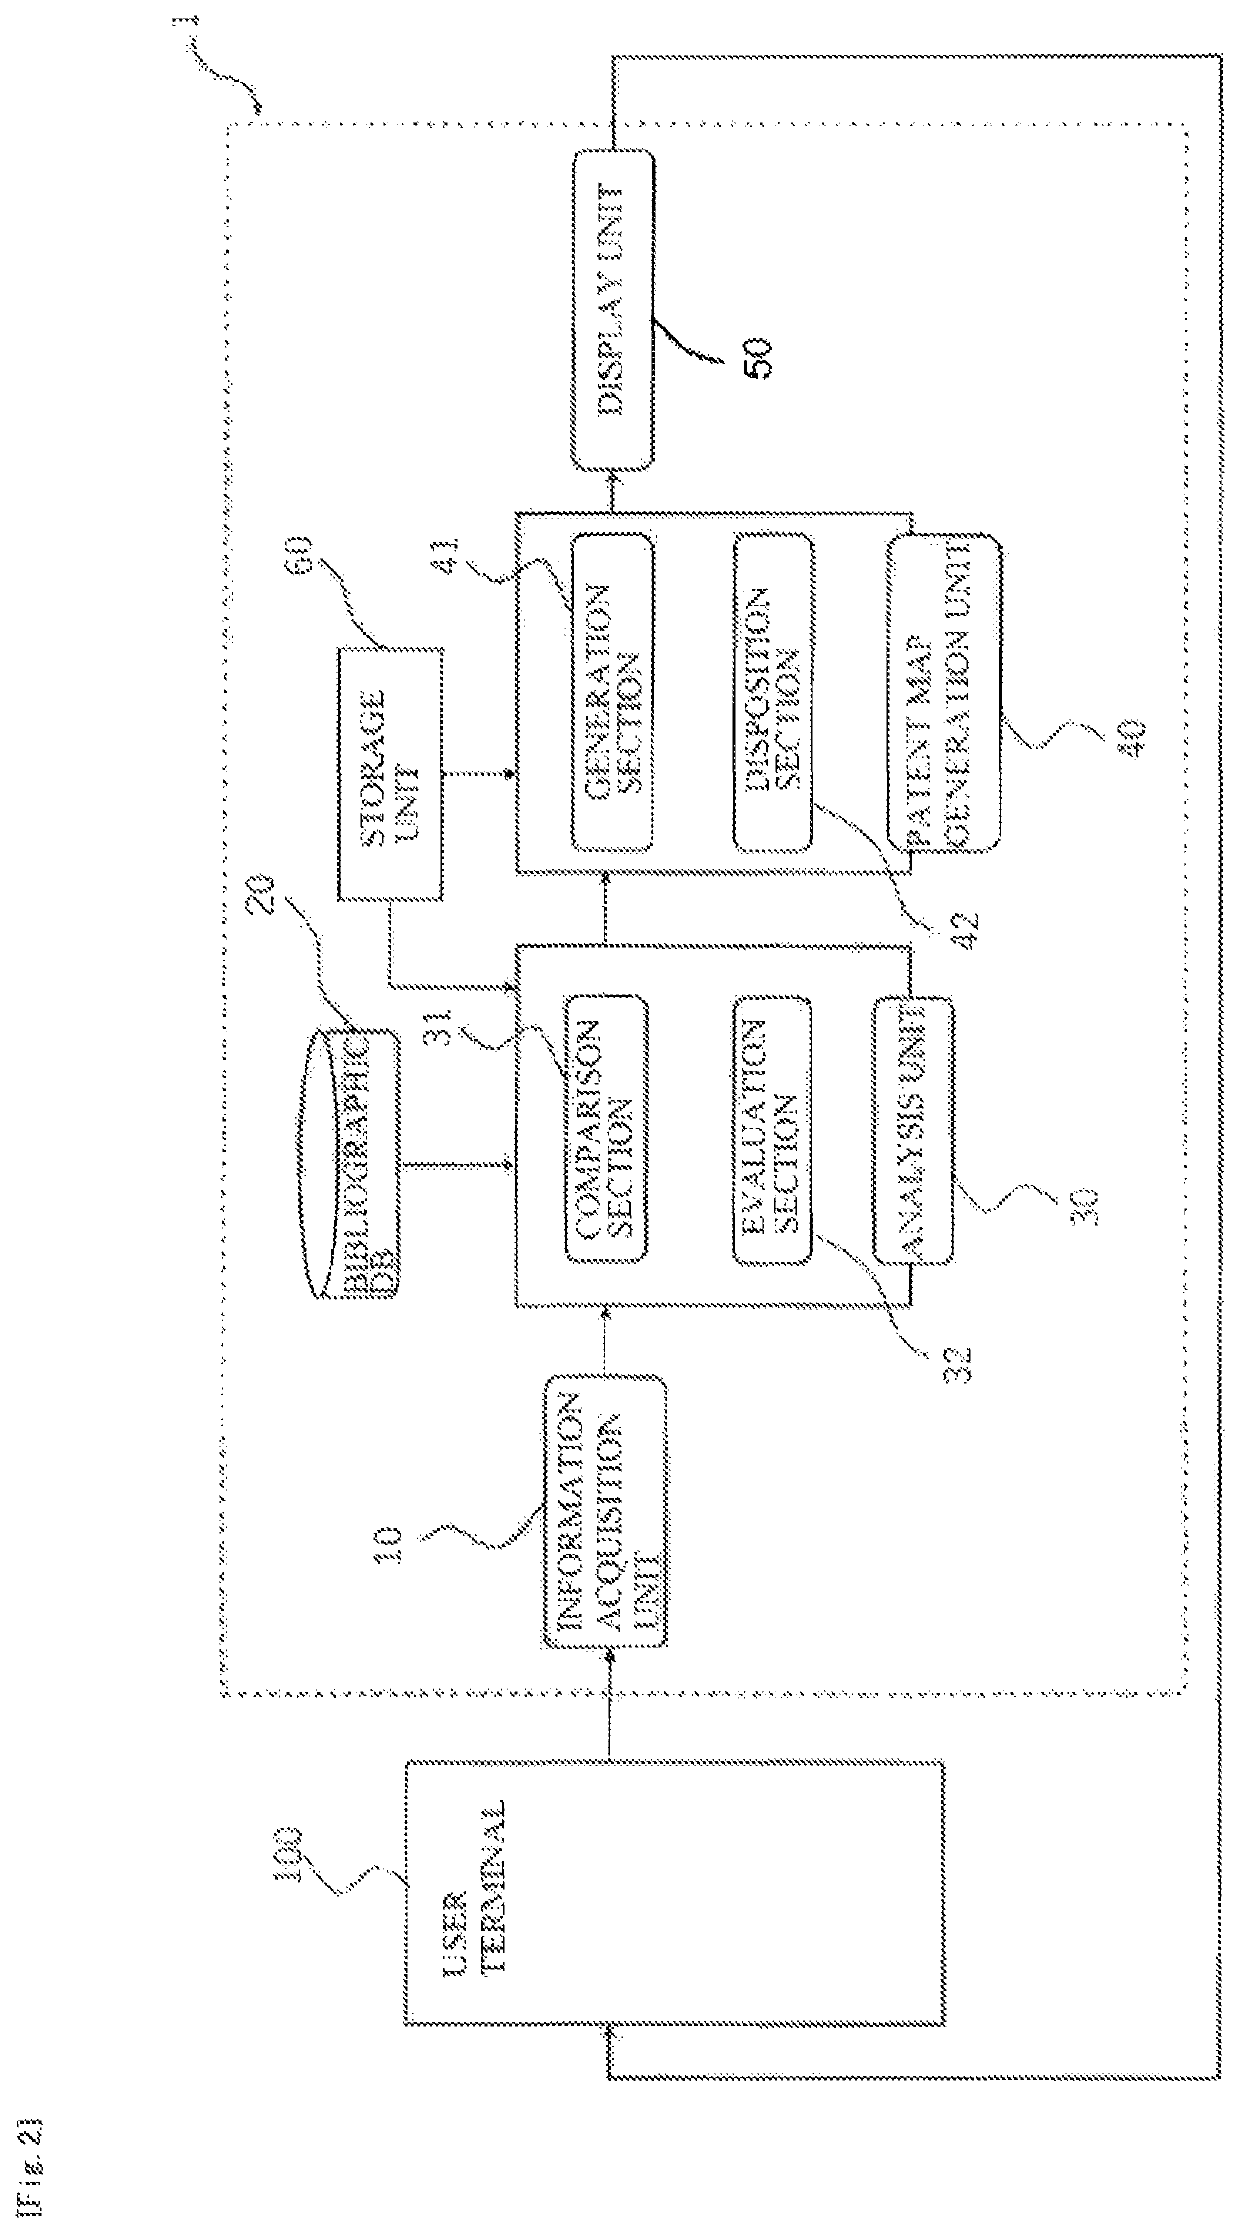 Patent map display device, patent map display method, and computer-readable recording medium including patent map display program stored therein